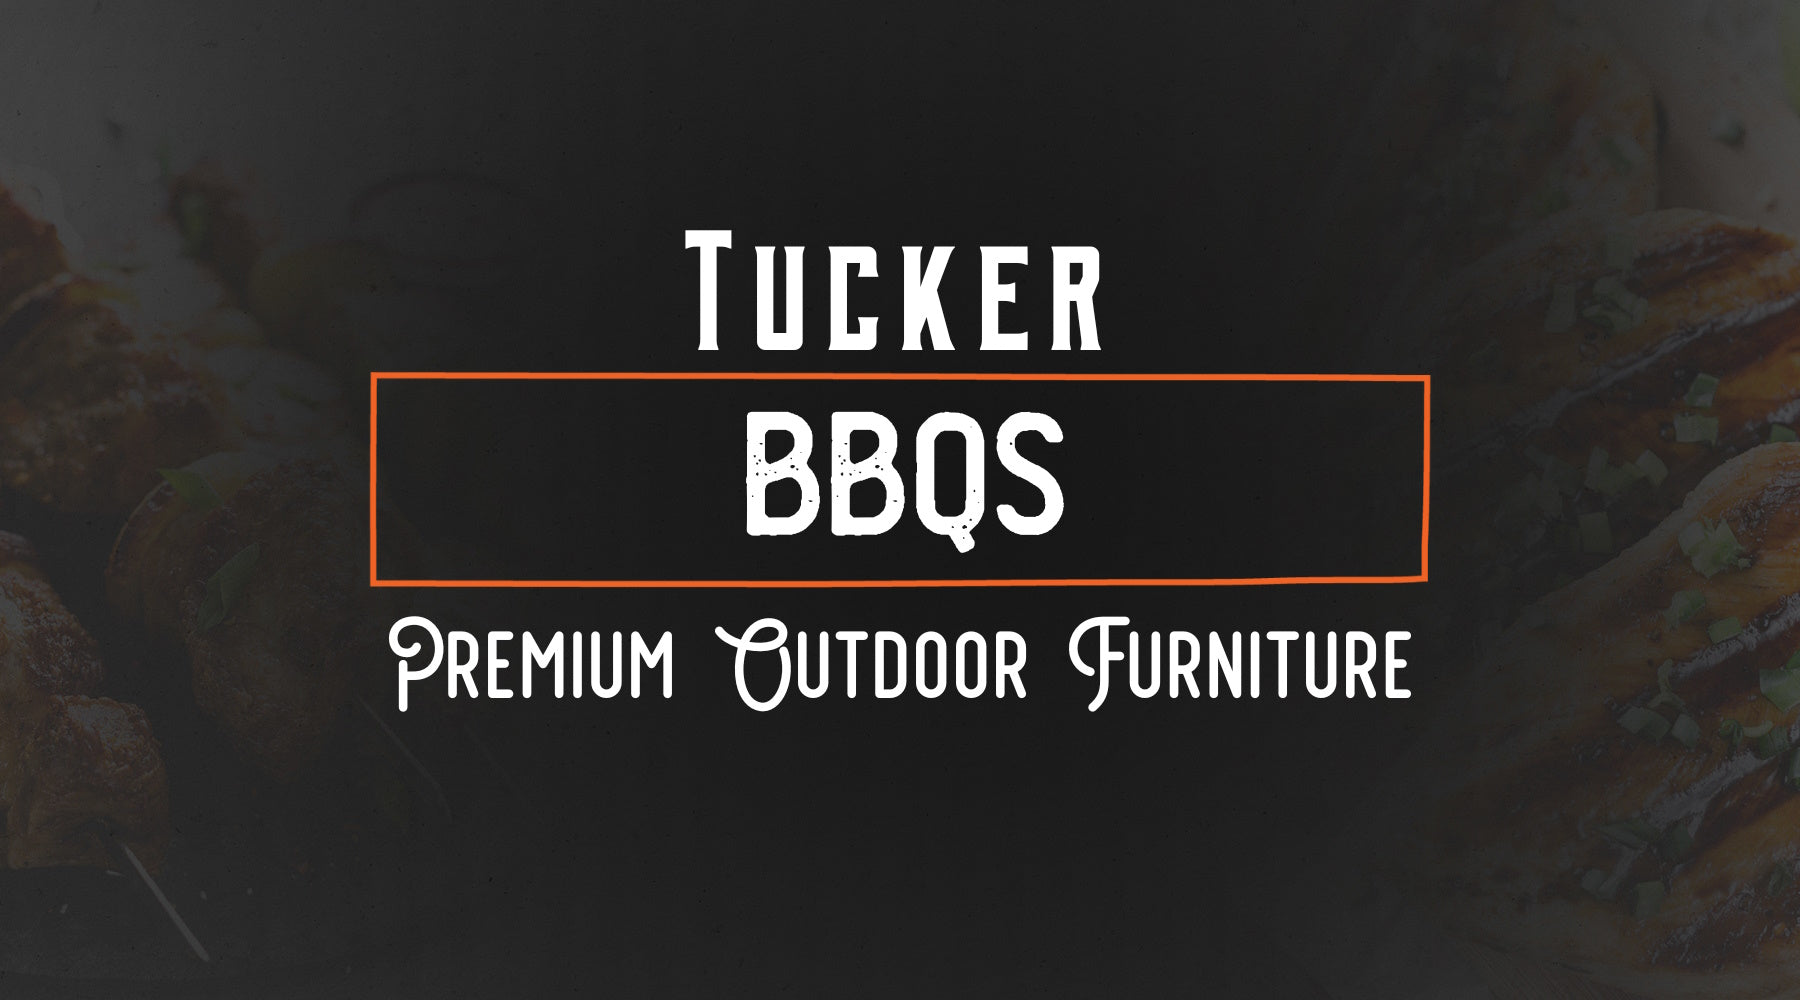 Tucker Barbecues Your One-Stop Shop for High-Quality Outdoor Furniture